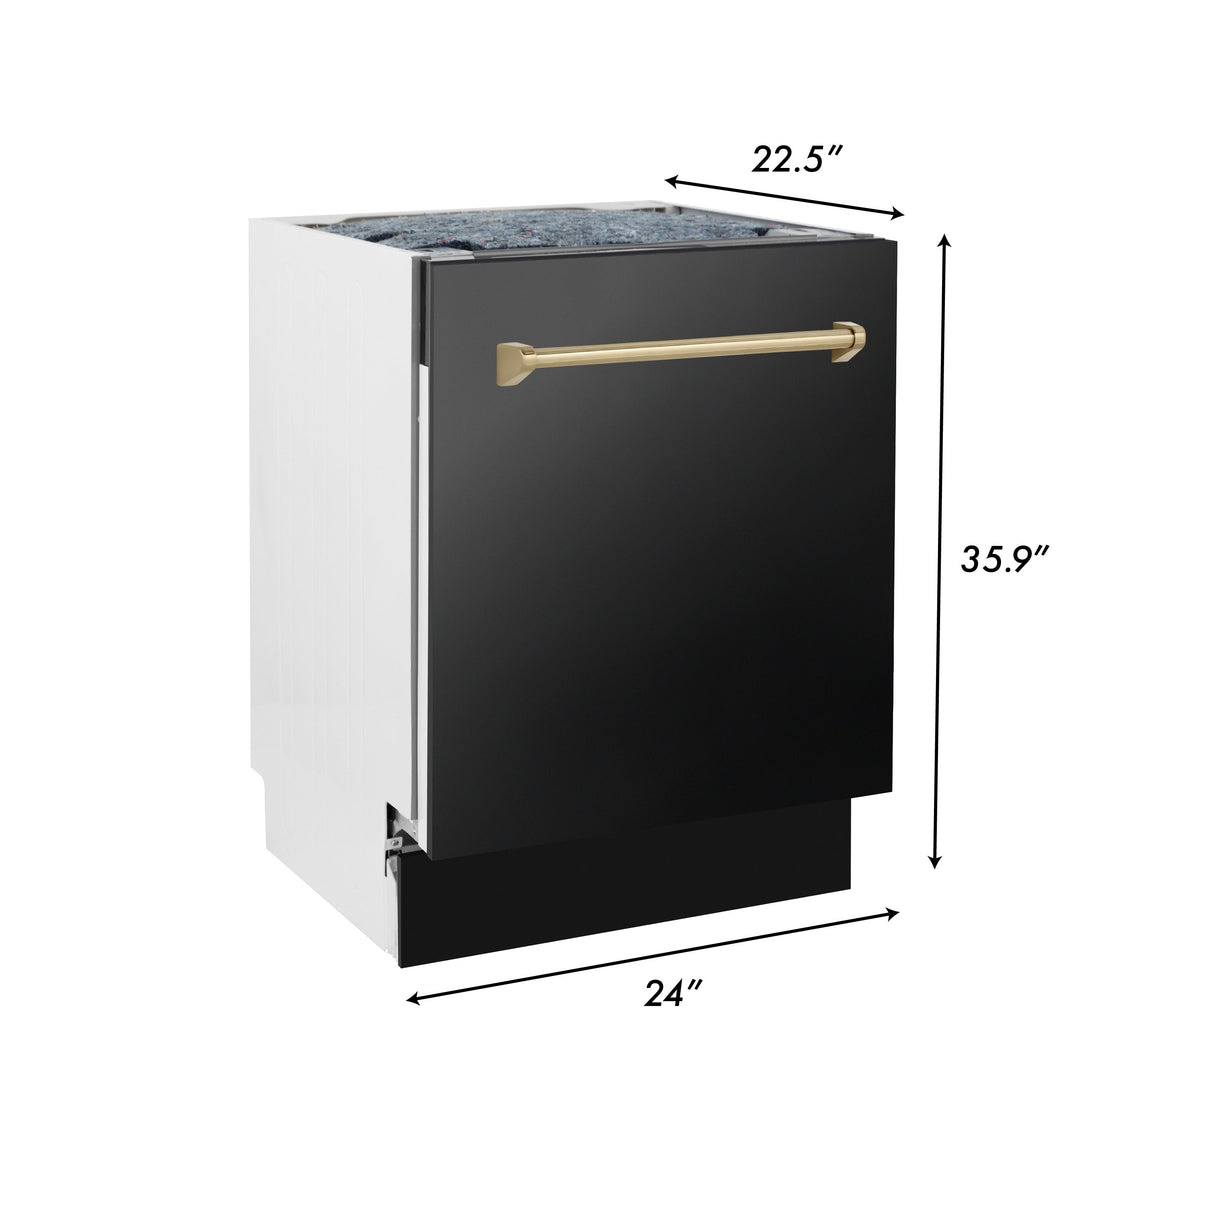 ZLINE Autograph Edition 36 in. Kitchen Package with Black Stainless Steel Dual Fuel Range, Range Hood and Dishwasher with Champagne Bronze Accents (3AKP-RABRHDWV36-CB)